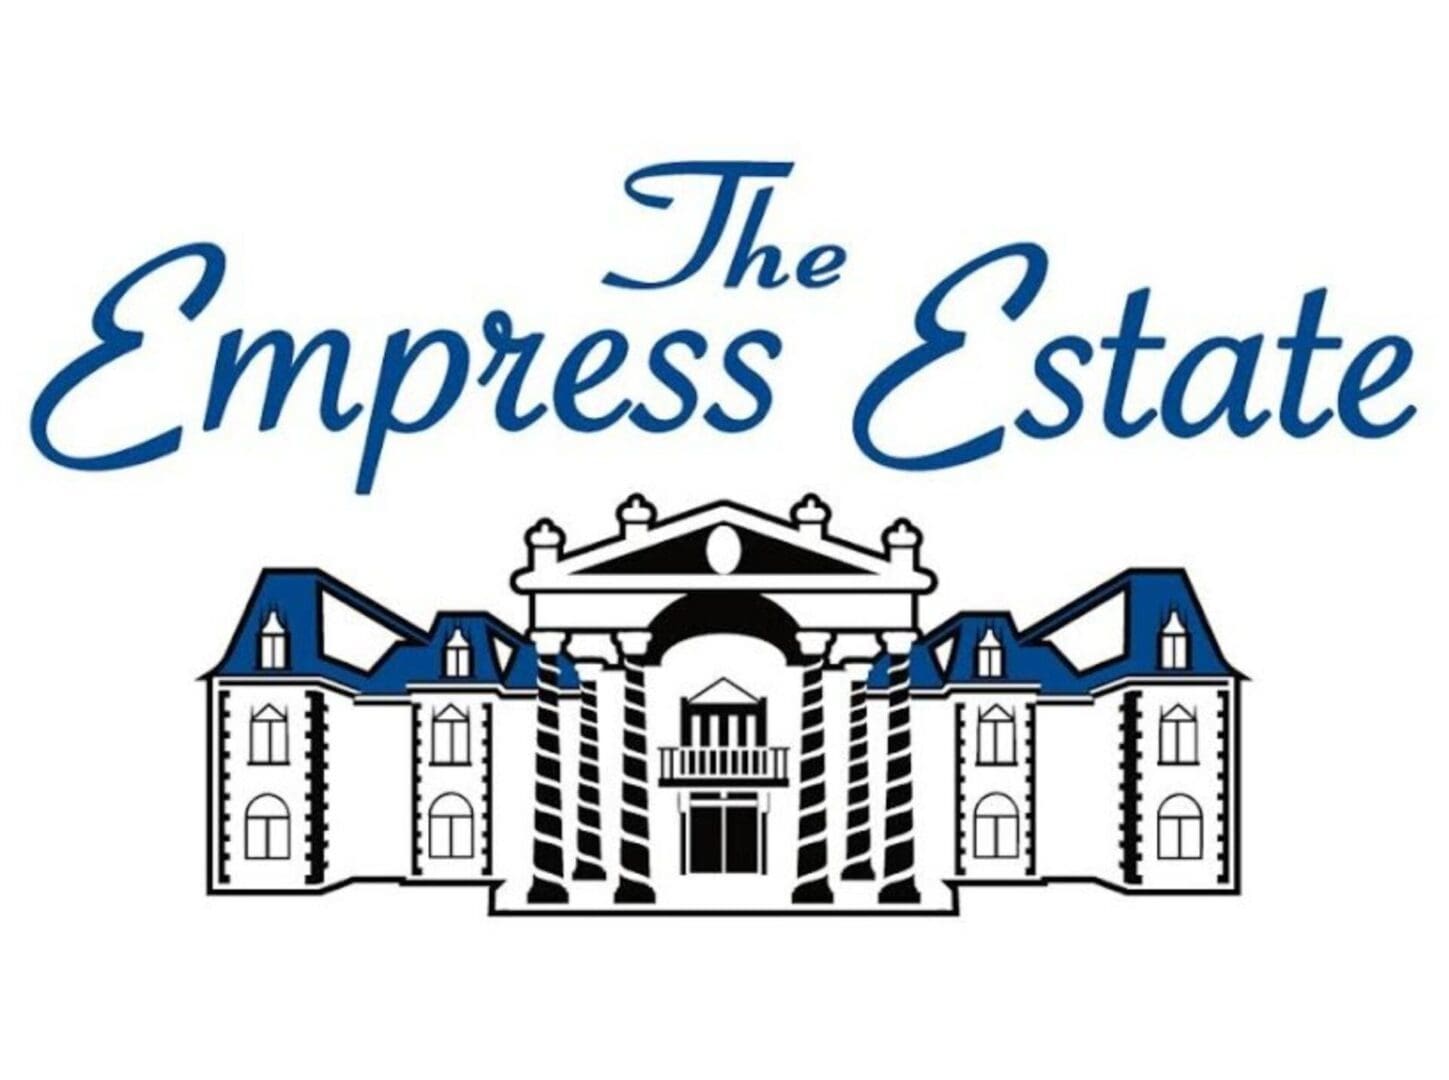 A drawing of the empress estate logo.